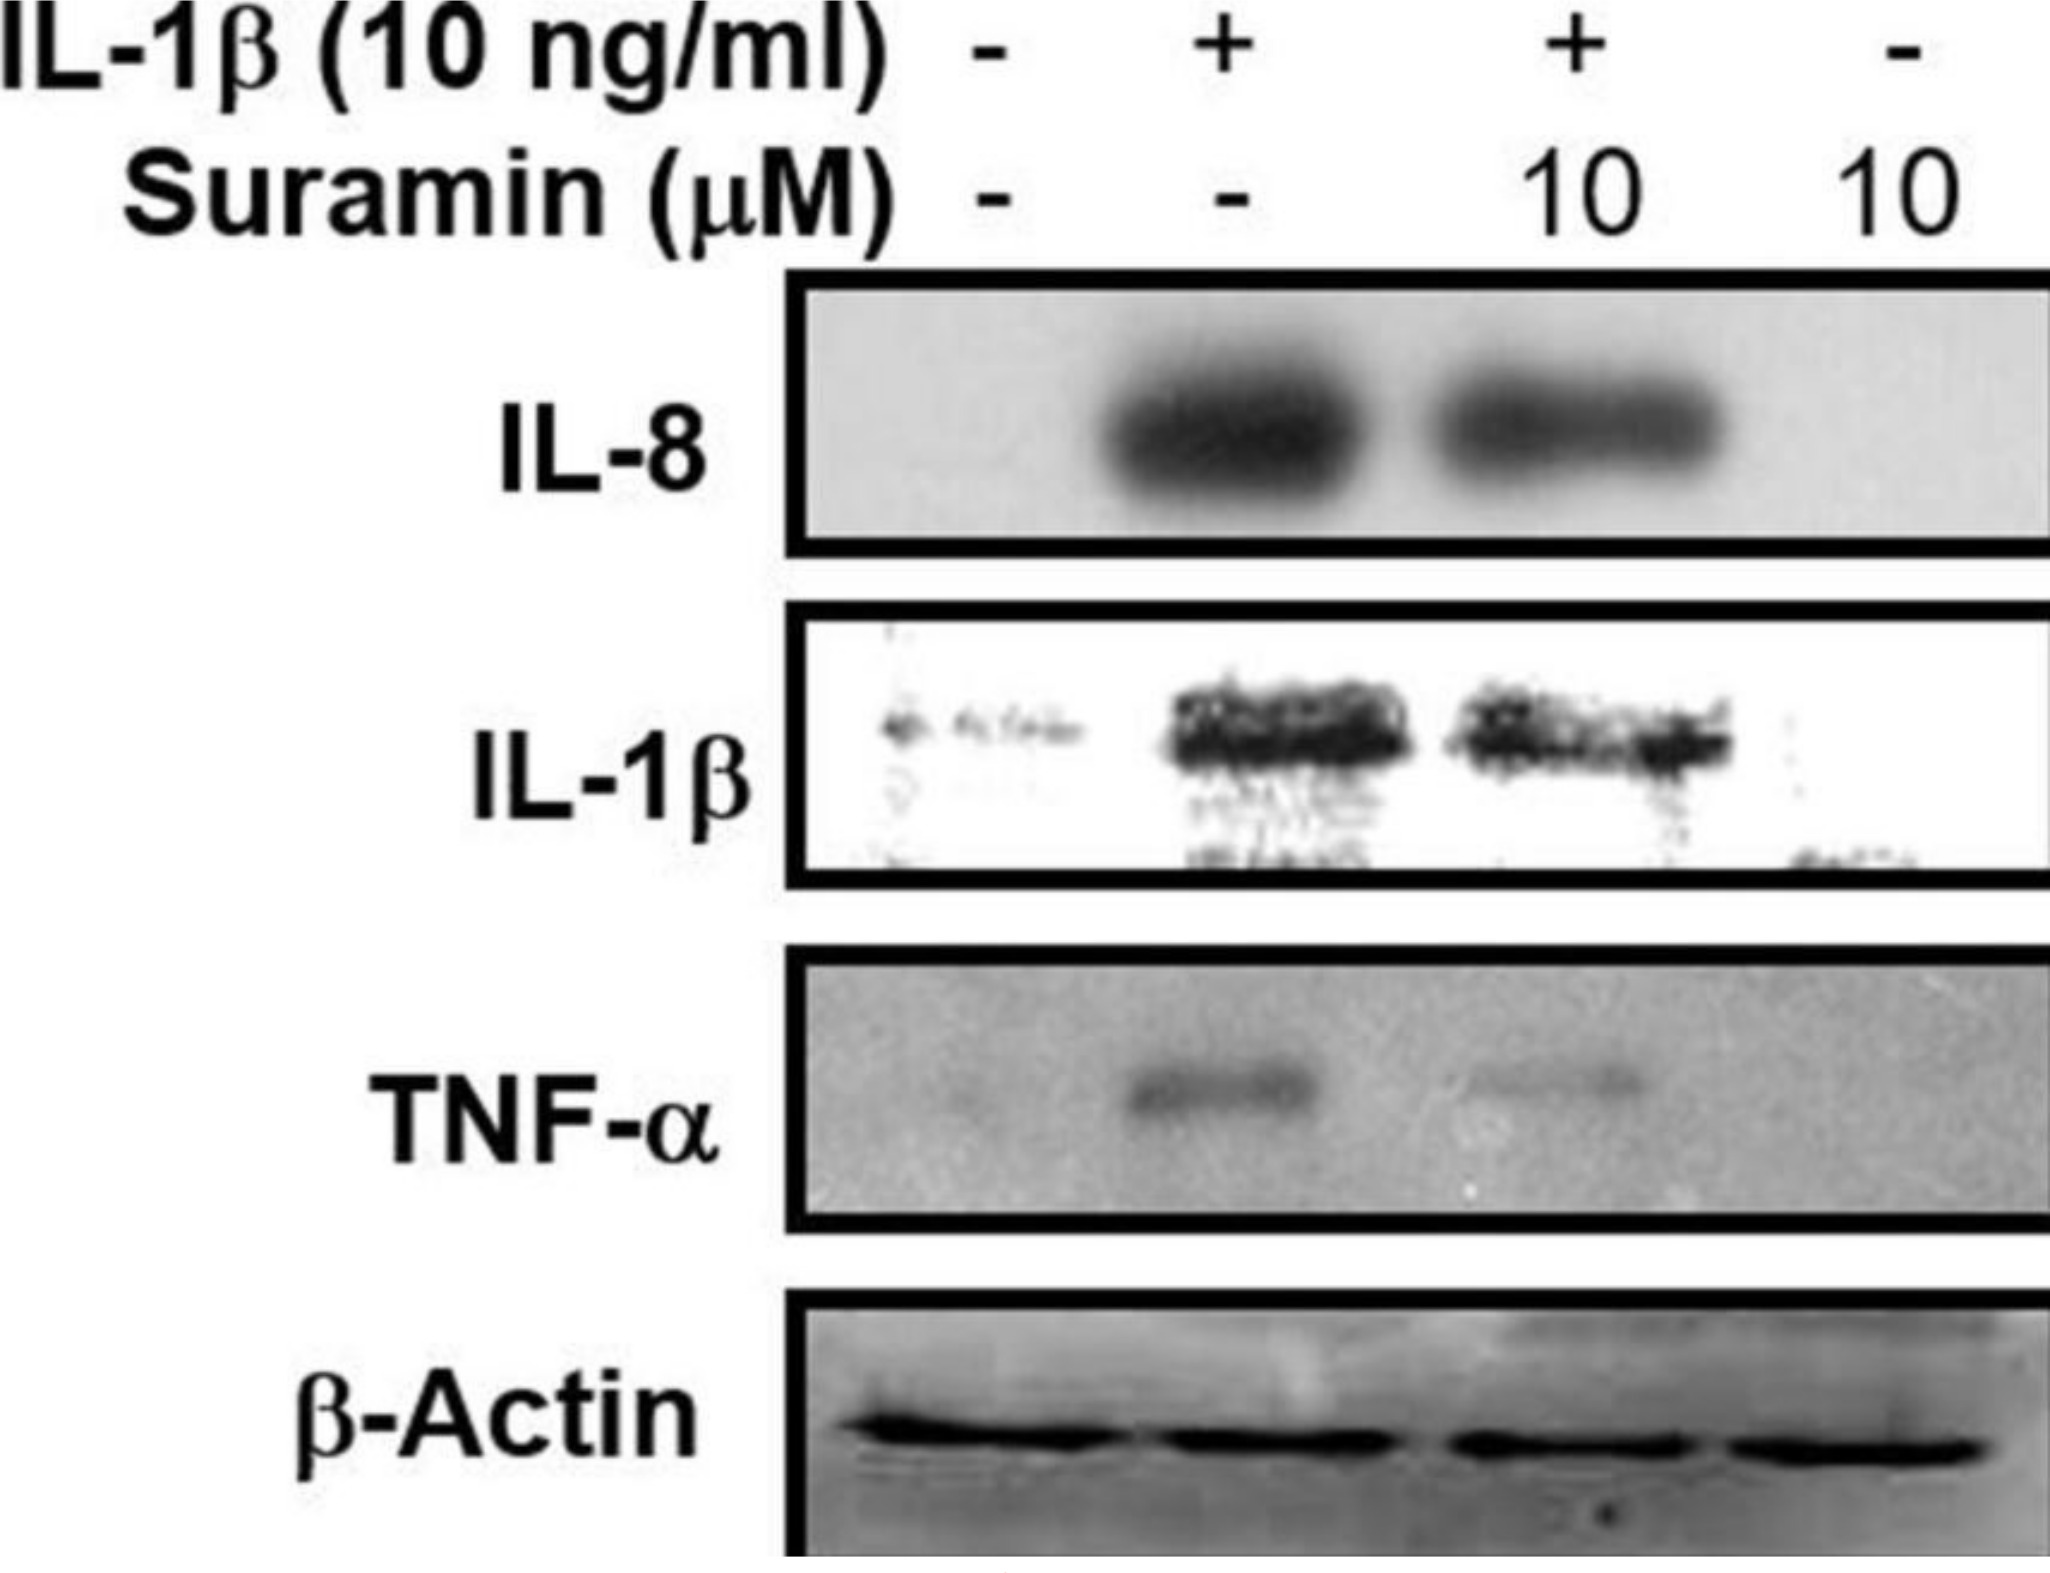 Fig. 7 
            Effect of suramin on interleukin (IL)-1β-induced proinflammatory cytokines production. Nucleus pulposus (NP) cells were treated with 10 ng/ml IL-1β for 24 hours, following pretreatment with vehicle or 10 μM suramin for one hour. The cell lysates were collected for western blot to measure the IL-1, IL-8, and tumour necrosis factor alpha (TNF-α), respectively. The expression of glyceraldehyde 3-phosphate dehydrogenase (gapdh) or β-actin was used as an internal control of real-time polymerase chain reaction or Western blot, respectively.
          